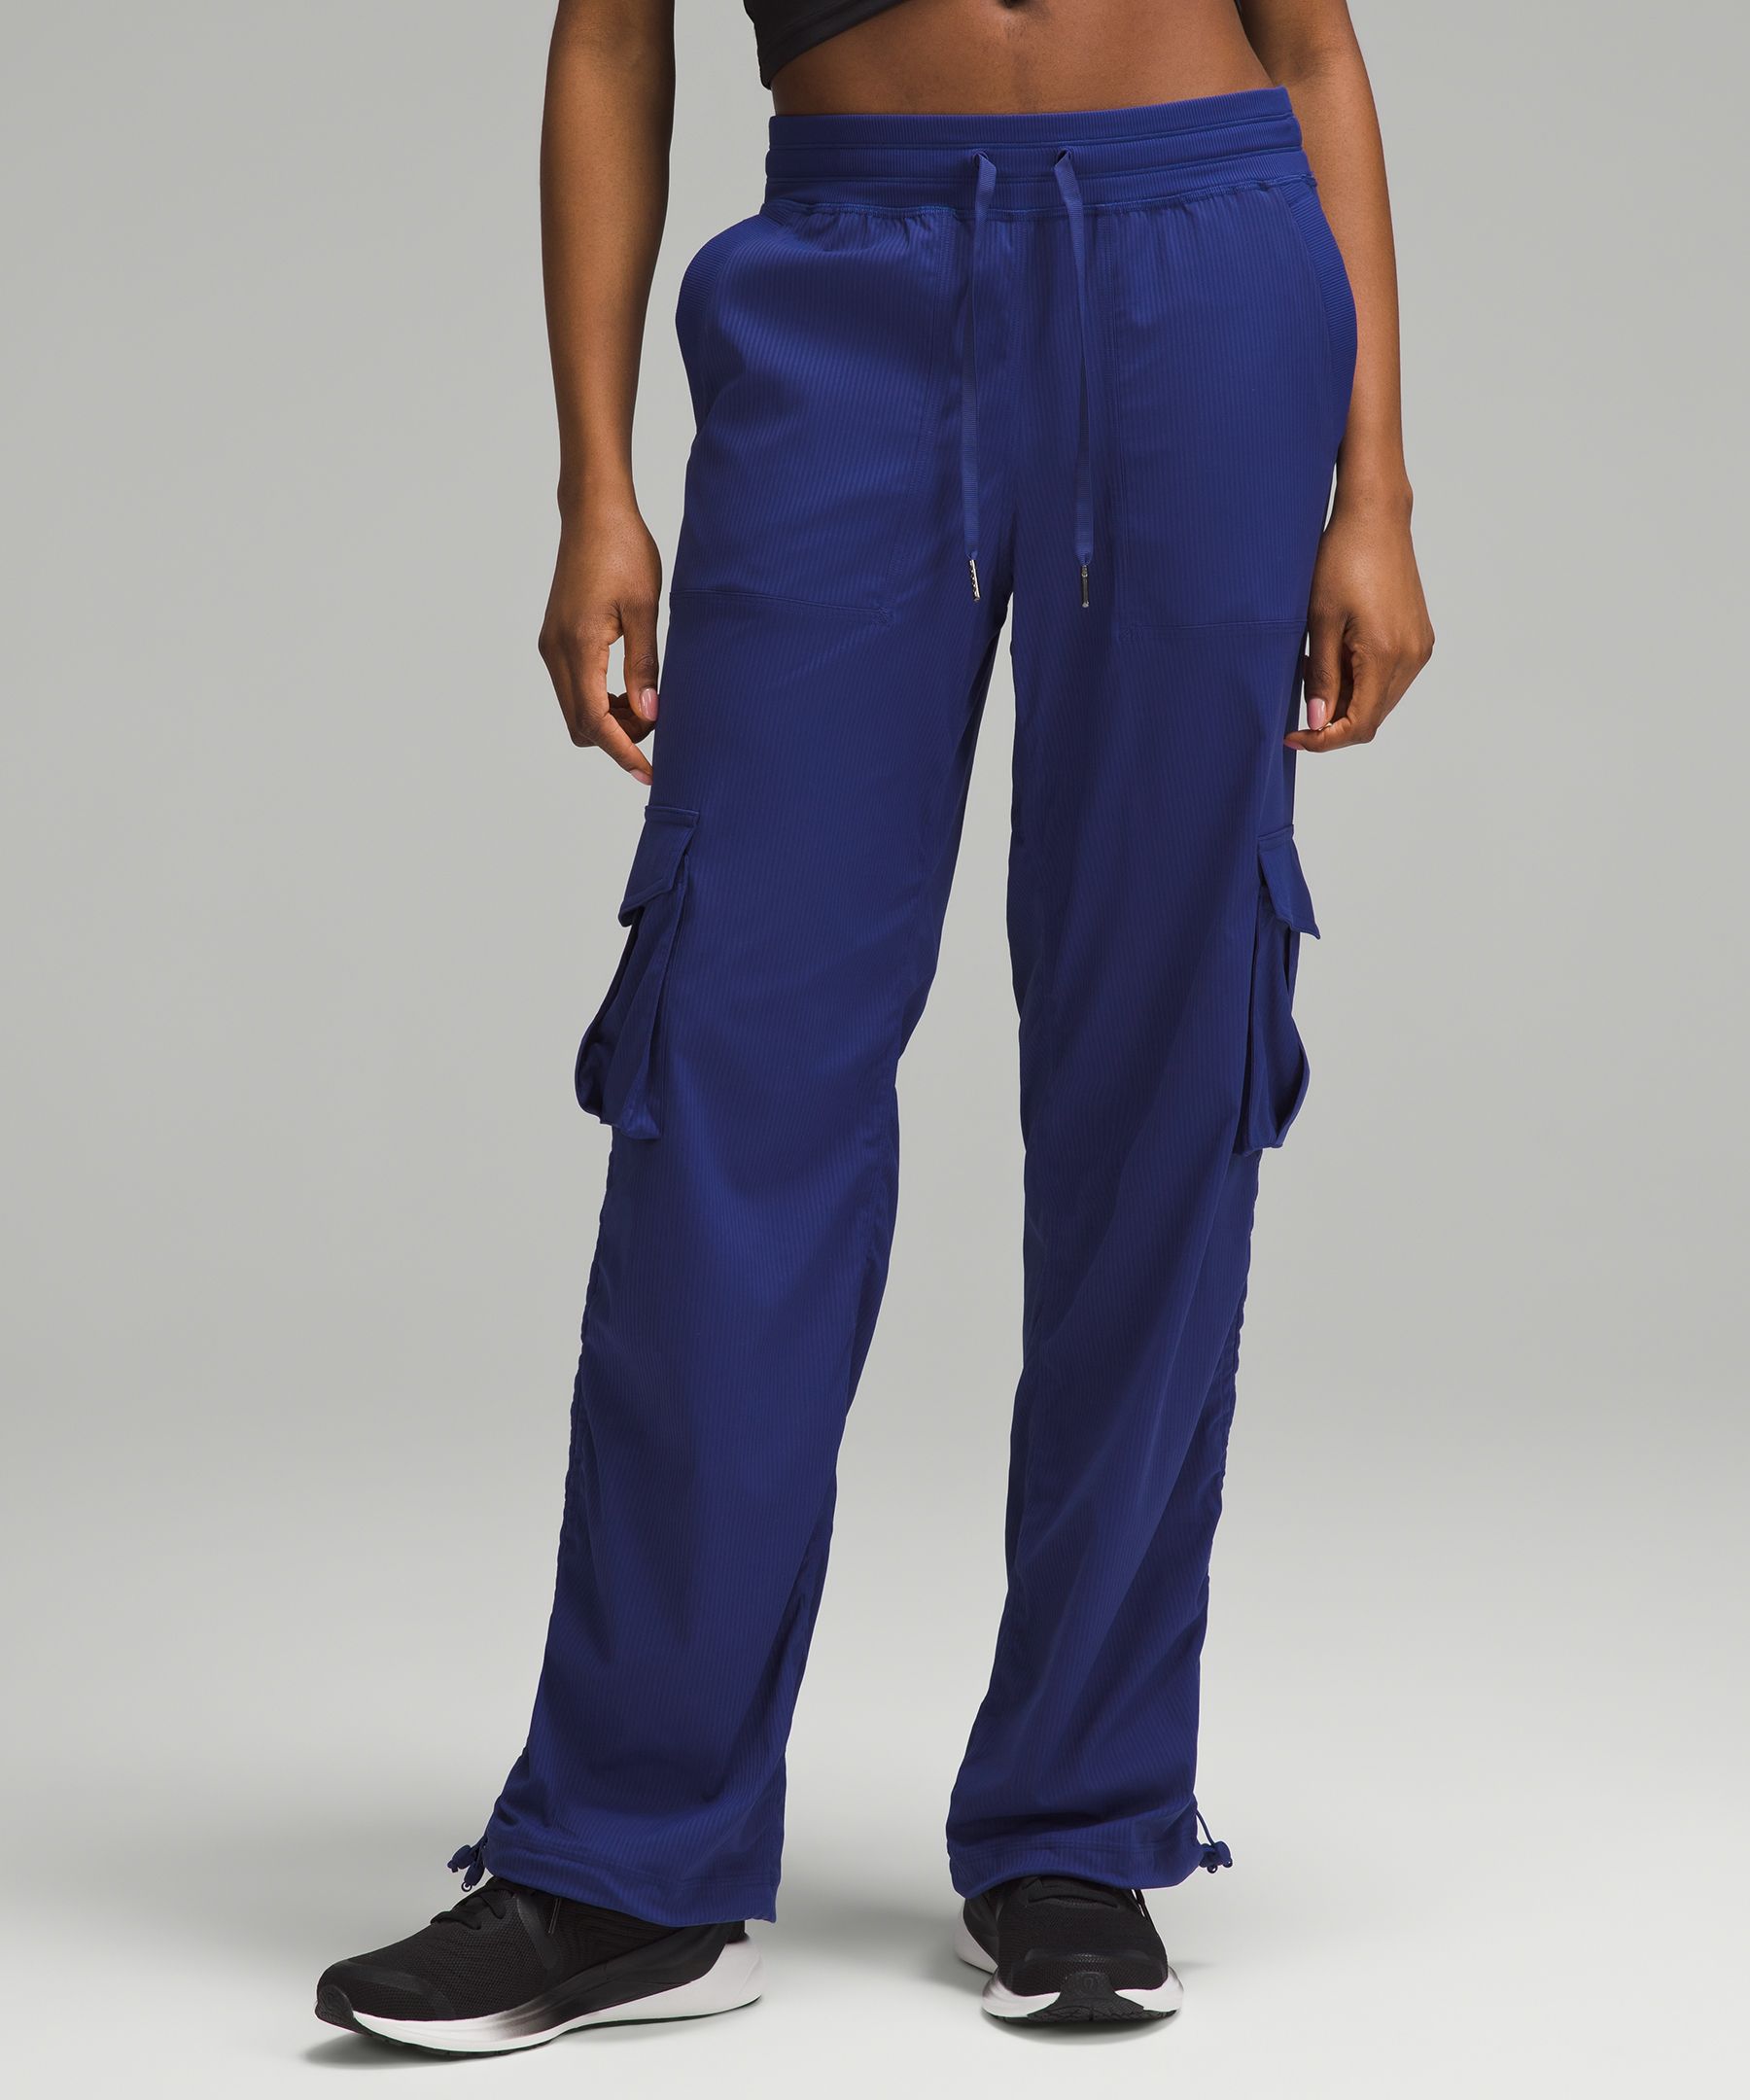 Dance Studio Relaxed-Fit Mid-Rise Cargo Pant, Women's Pants